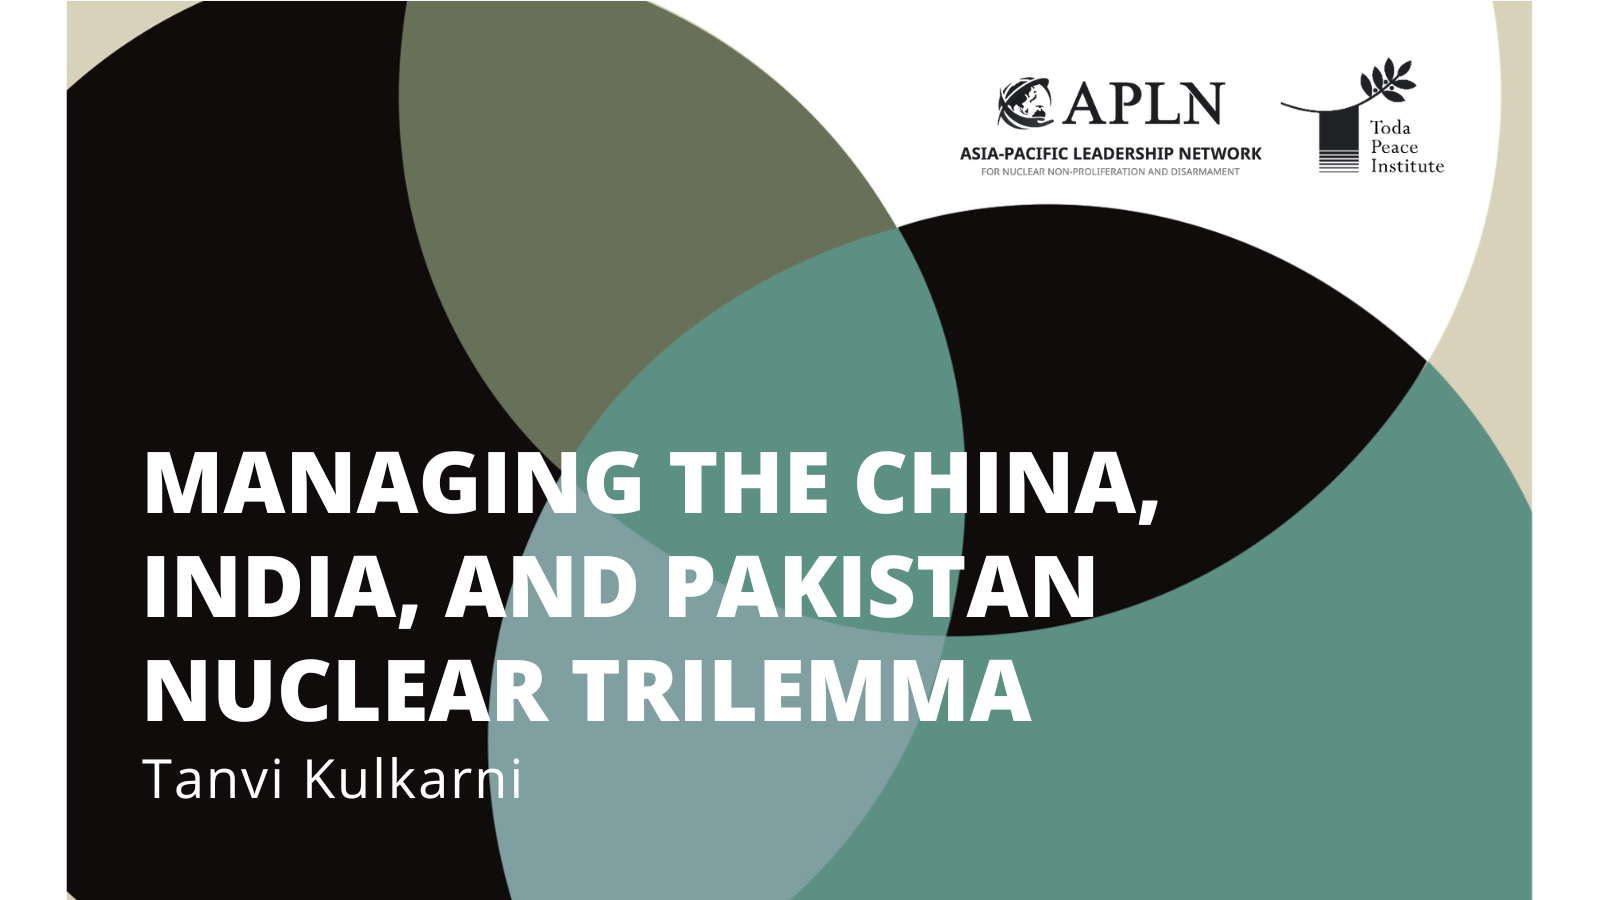 [Special Report] Managing the China, India, and Pakistan Nuclear Trilemma